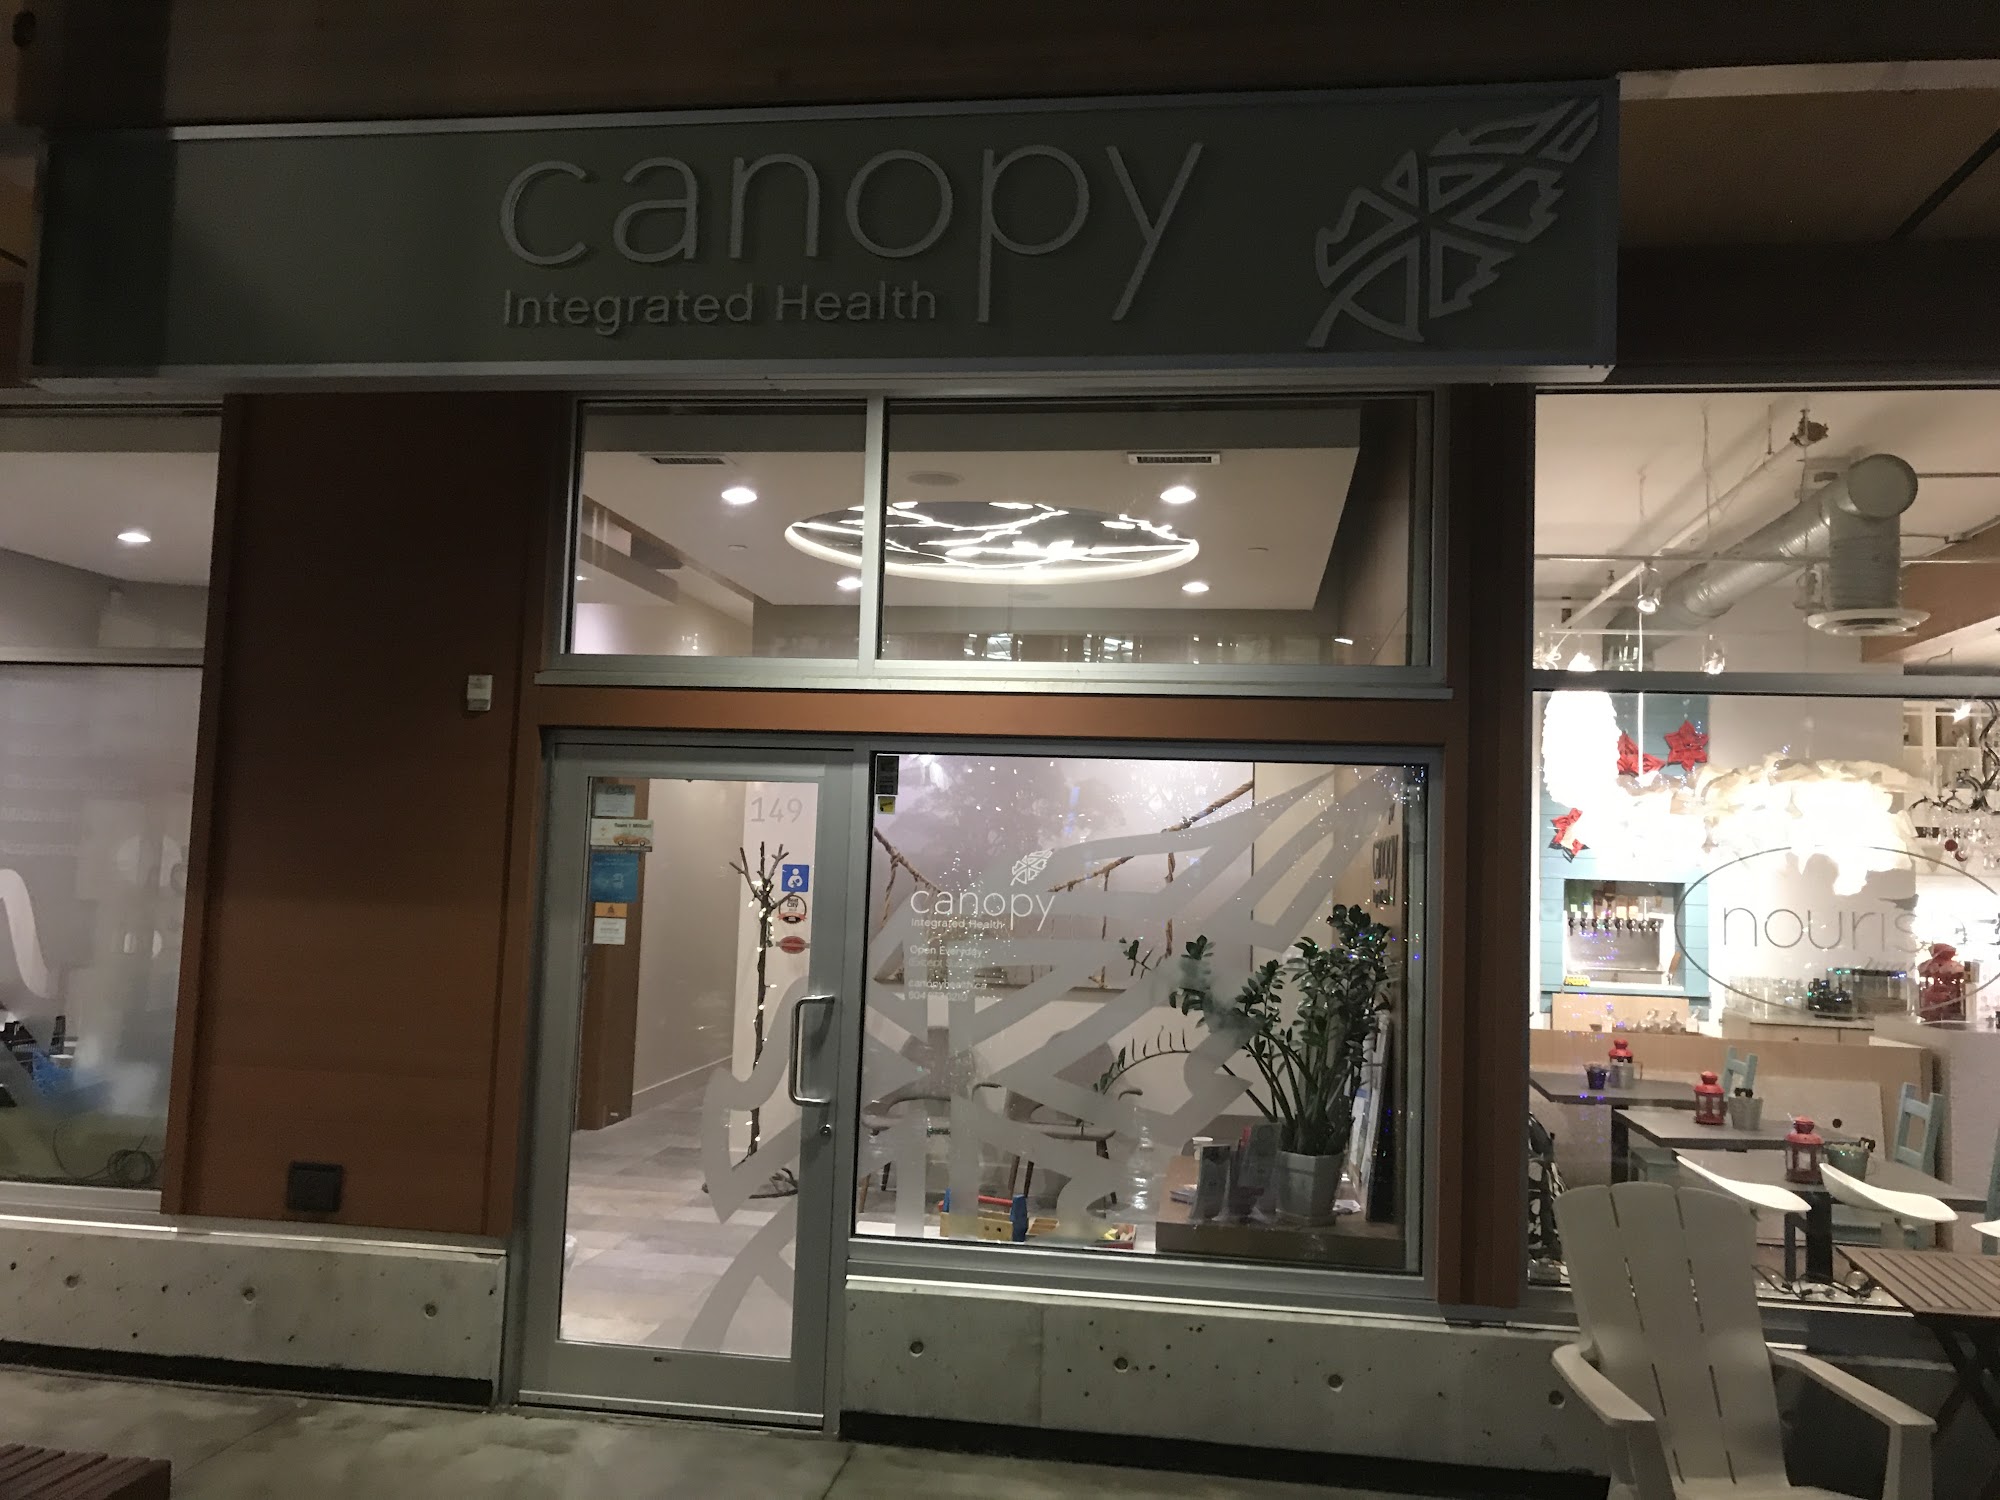 Canopy Integrated Health